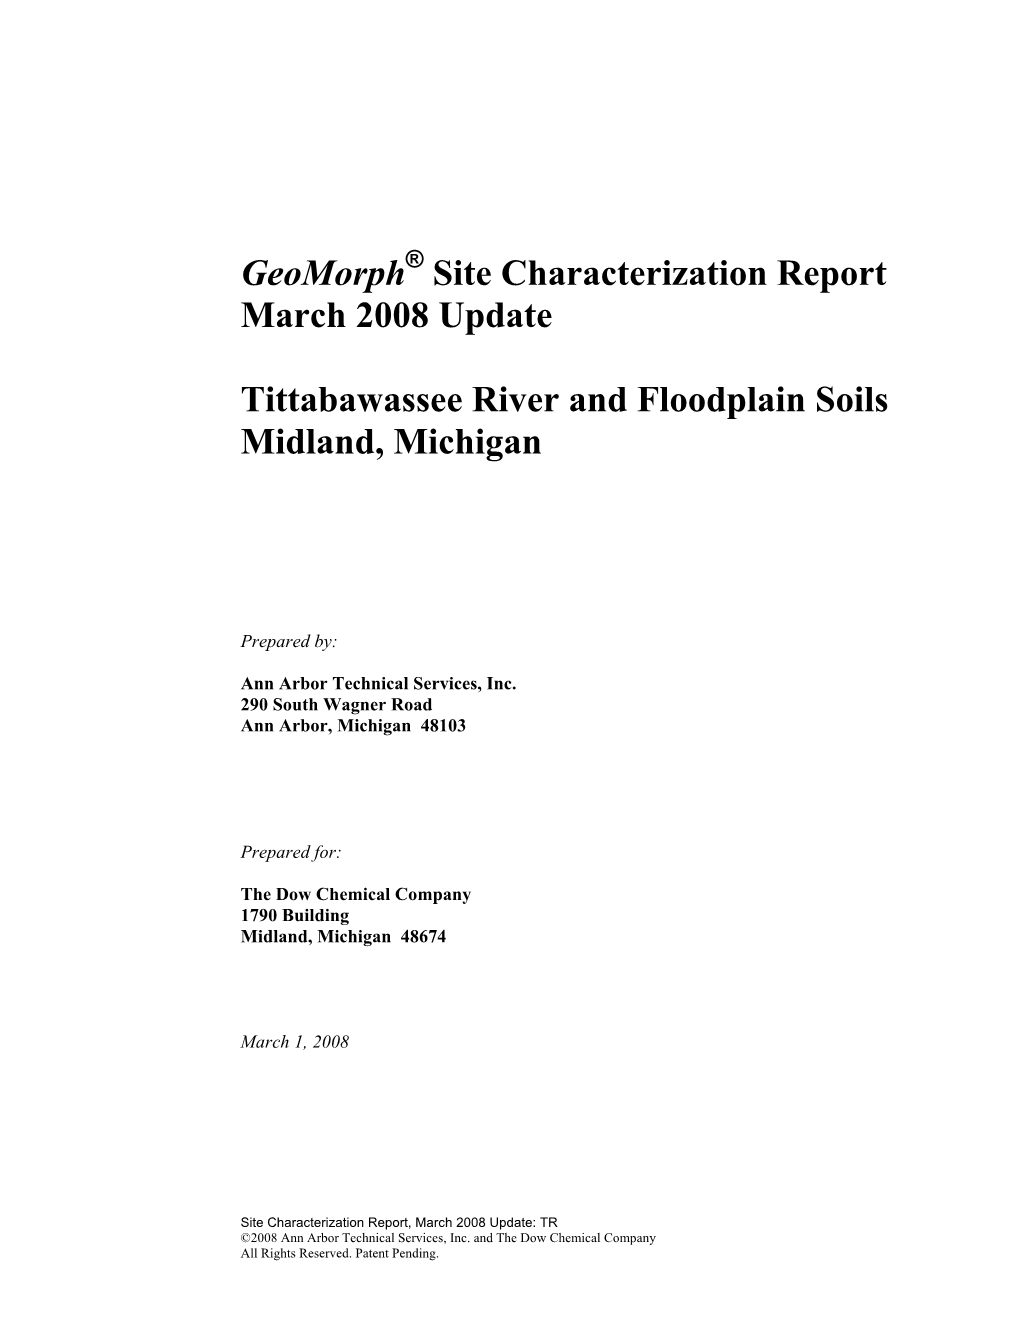 Geomorph Site Characterization Report March 2008 Update